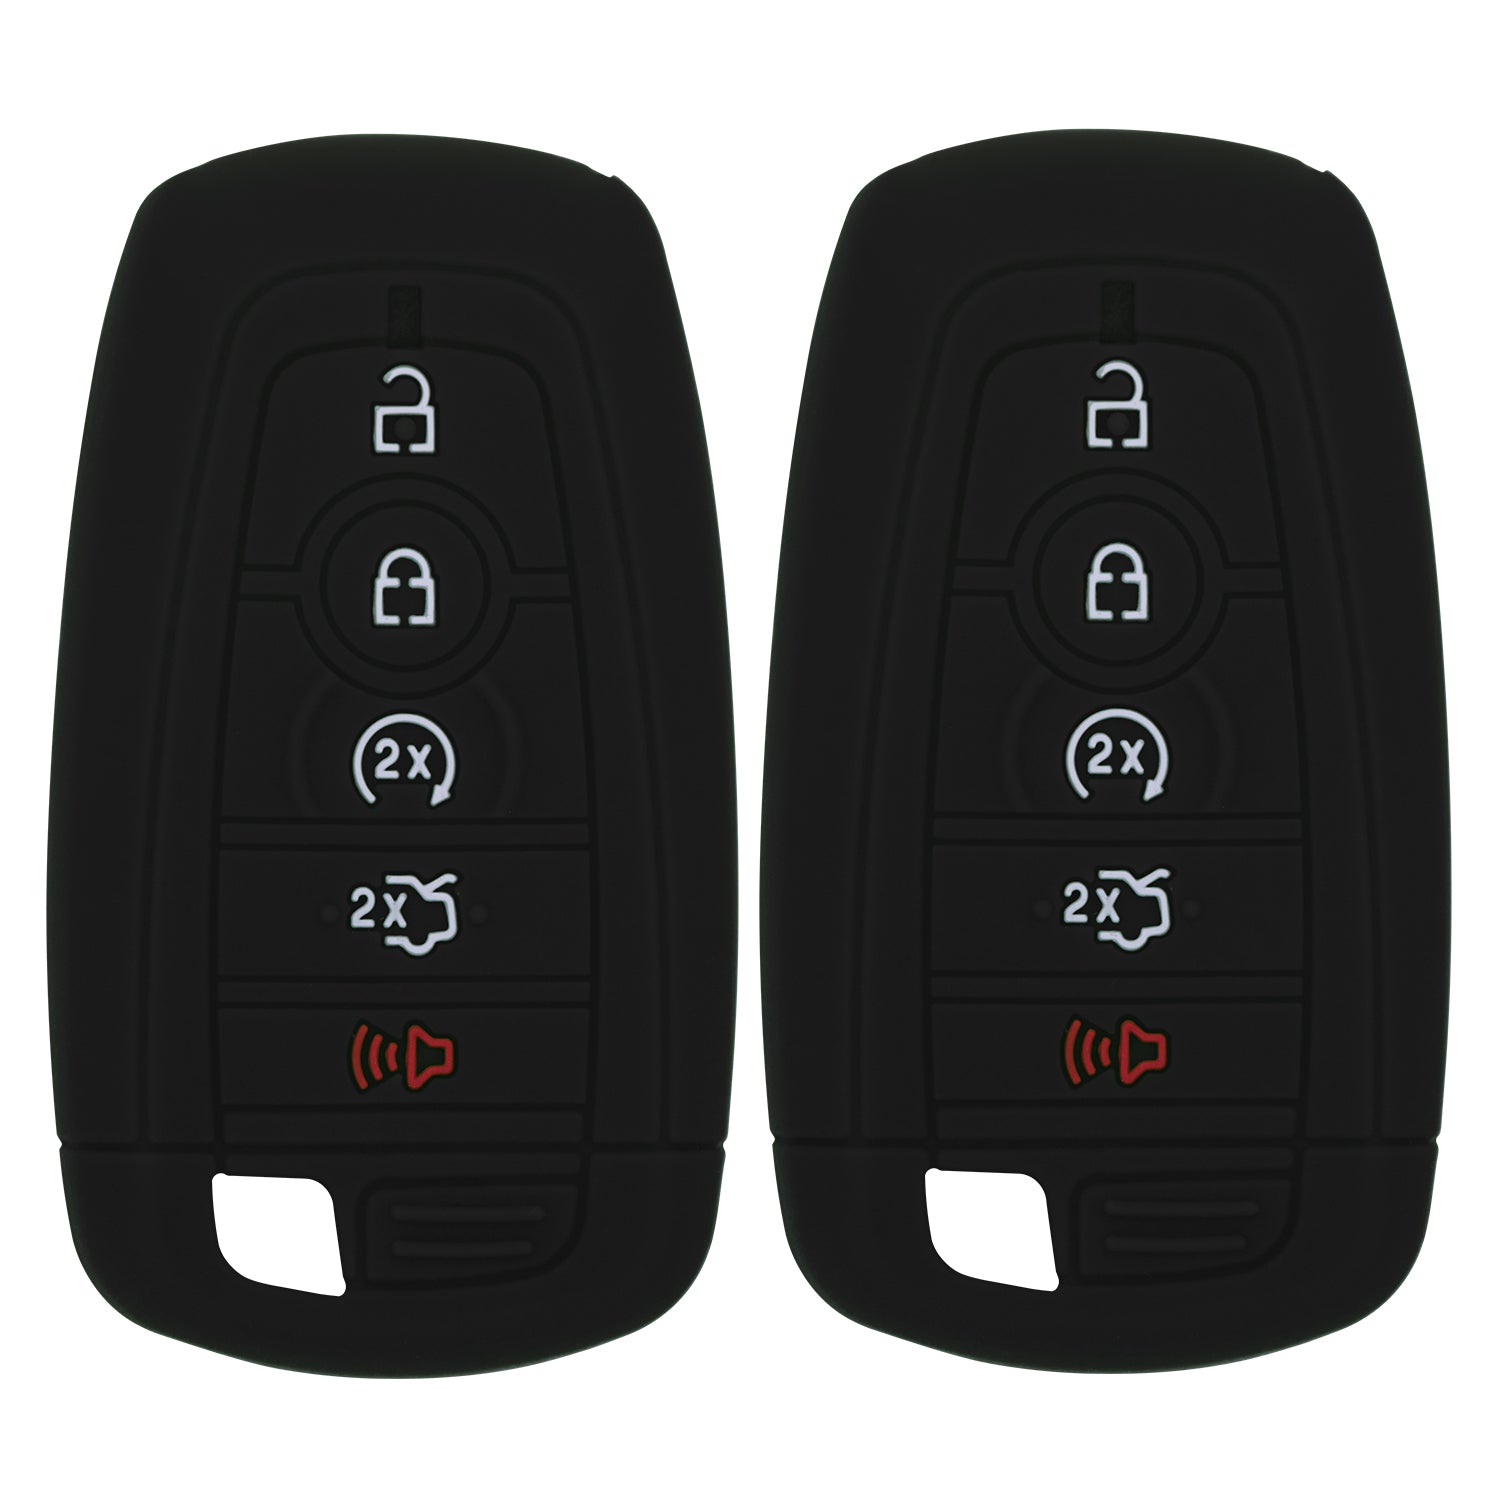 Silicone Case for Smart Key Remote Keyless Entry for Ford Fusion Explorer Edge Mustang Expedition M3N-A2C93142600 164-R8149 164R8149 R8149 (Double Black)